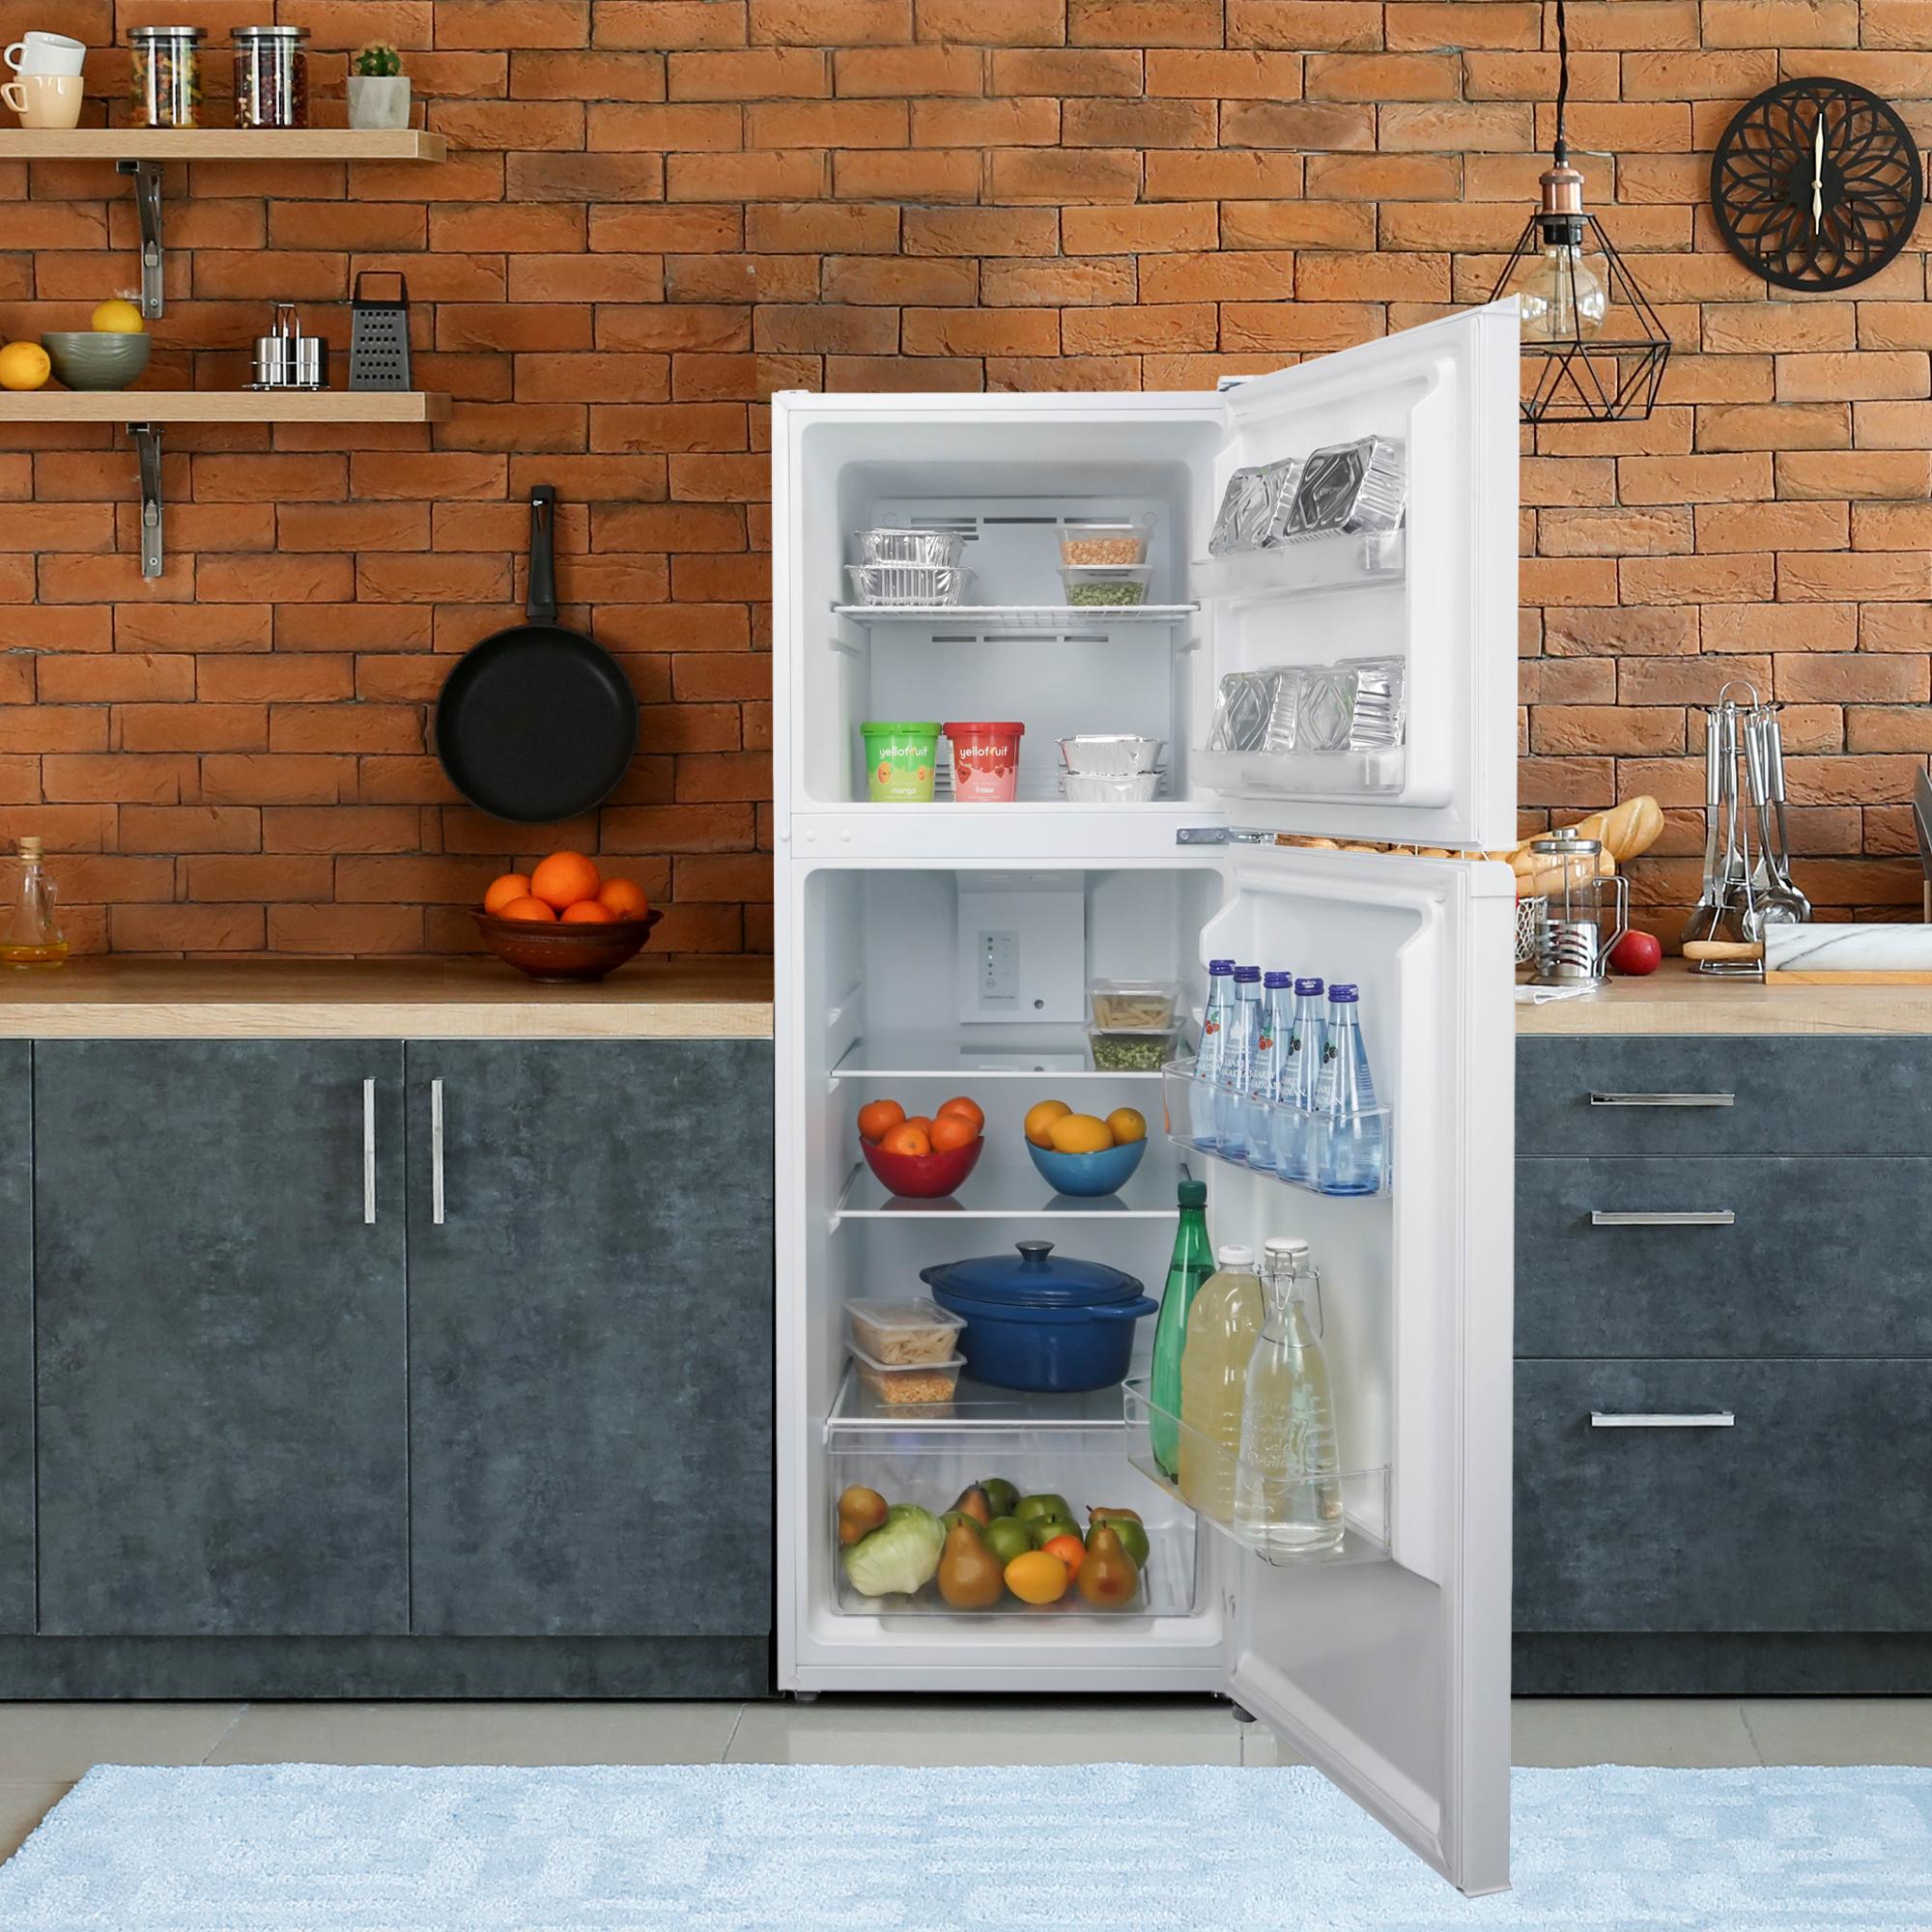 Danby 10.1 cu. ft. Top Mount Apartment Size Fridge in White